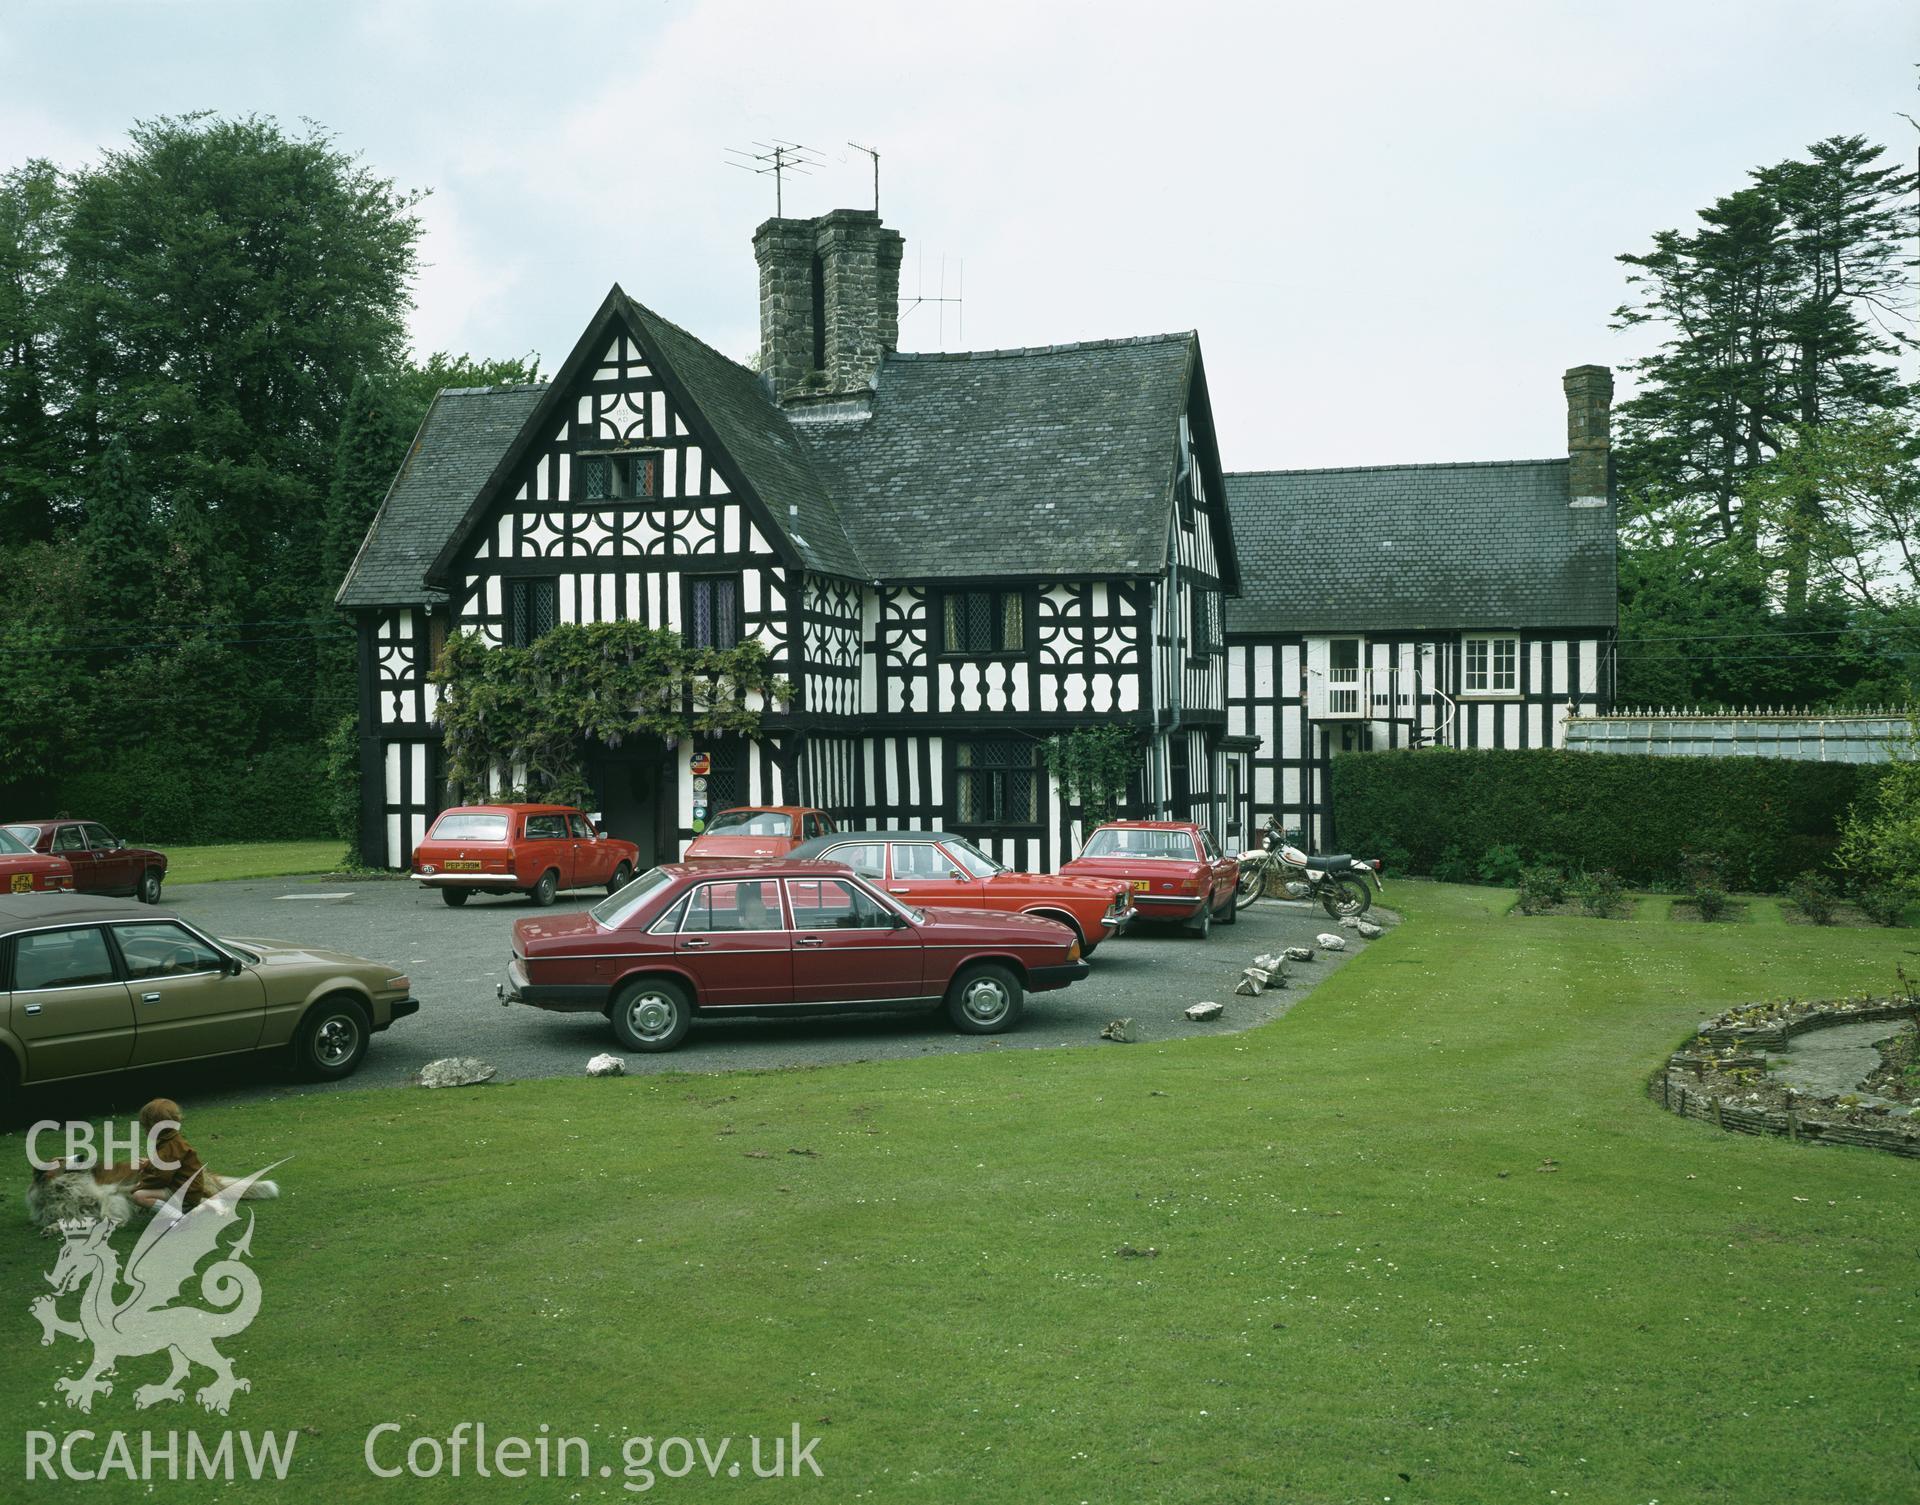 RCAHMW colour transparency showing Maesmawr Hall, taken by RCAHMW, c.1979